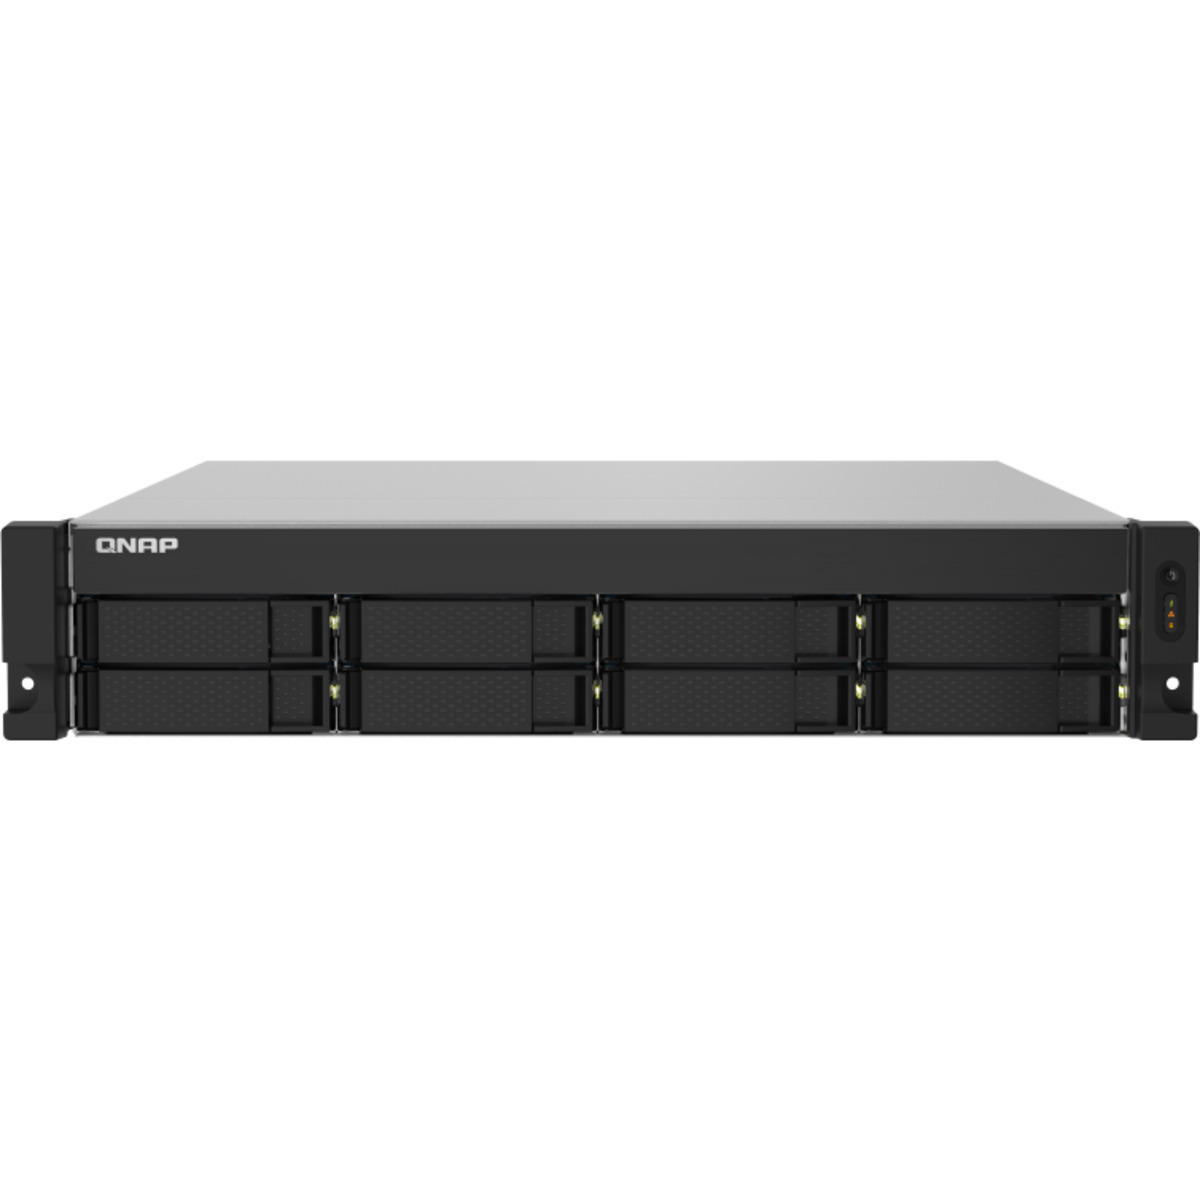 QNAP TS-832PXU-RP 48tb 8-Bay RackMount Personal / Basic Home / Small Office NAS - Network Attached Storage Device 4x12tb Western Digital Red Plus WD120EFBX 3.5 7200rpm SATA 6Gb/s HDD NAS Class Drives Installed - Burn-In Tested - FREE RAM UPGRADE TS-832PXU-RP